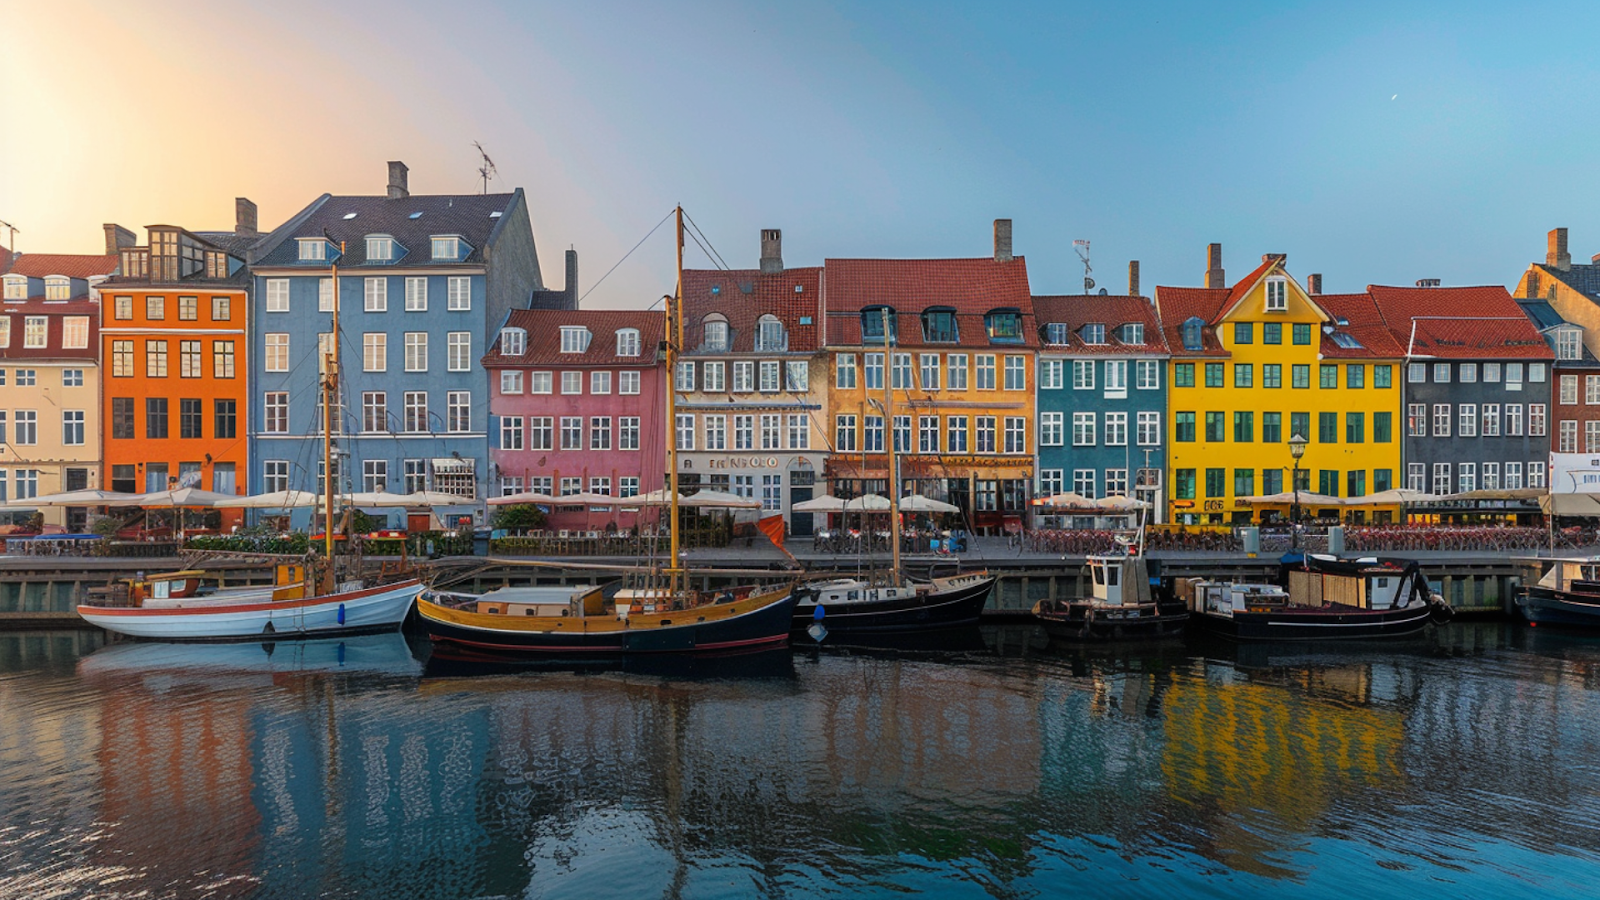 The Copenhagen port where boats are docked with colorful houses in the background